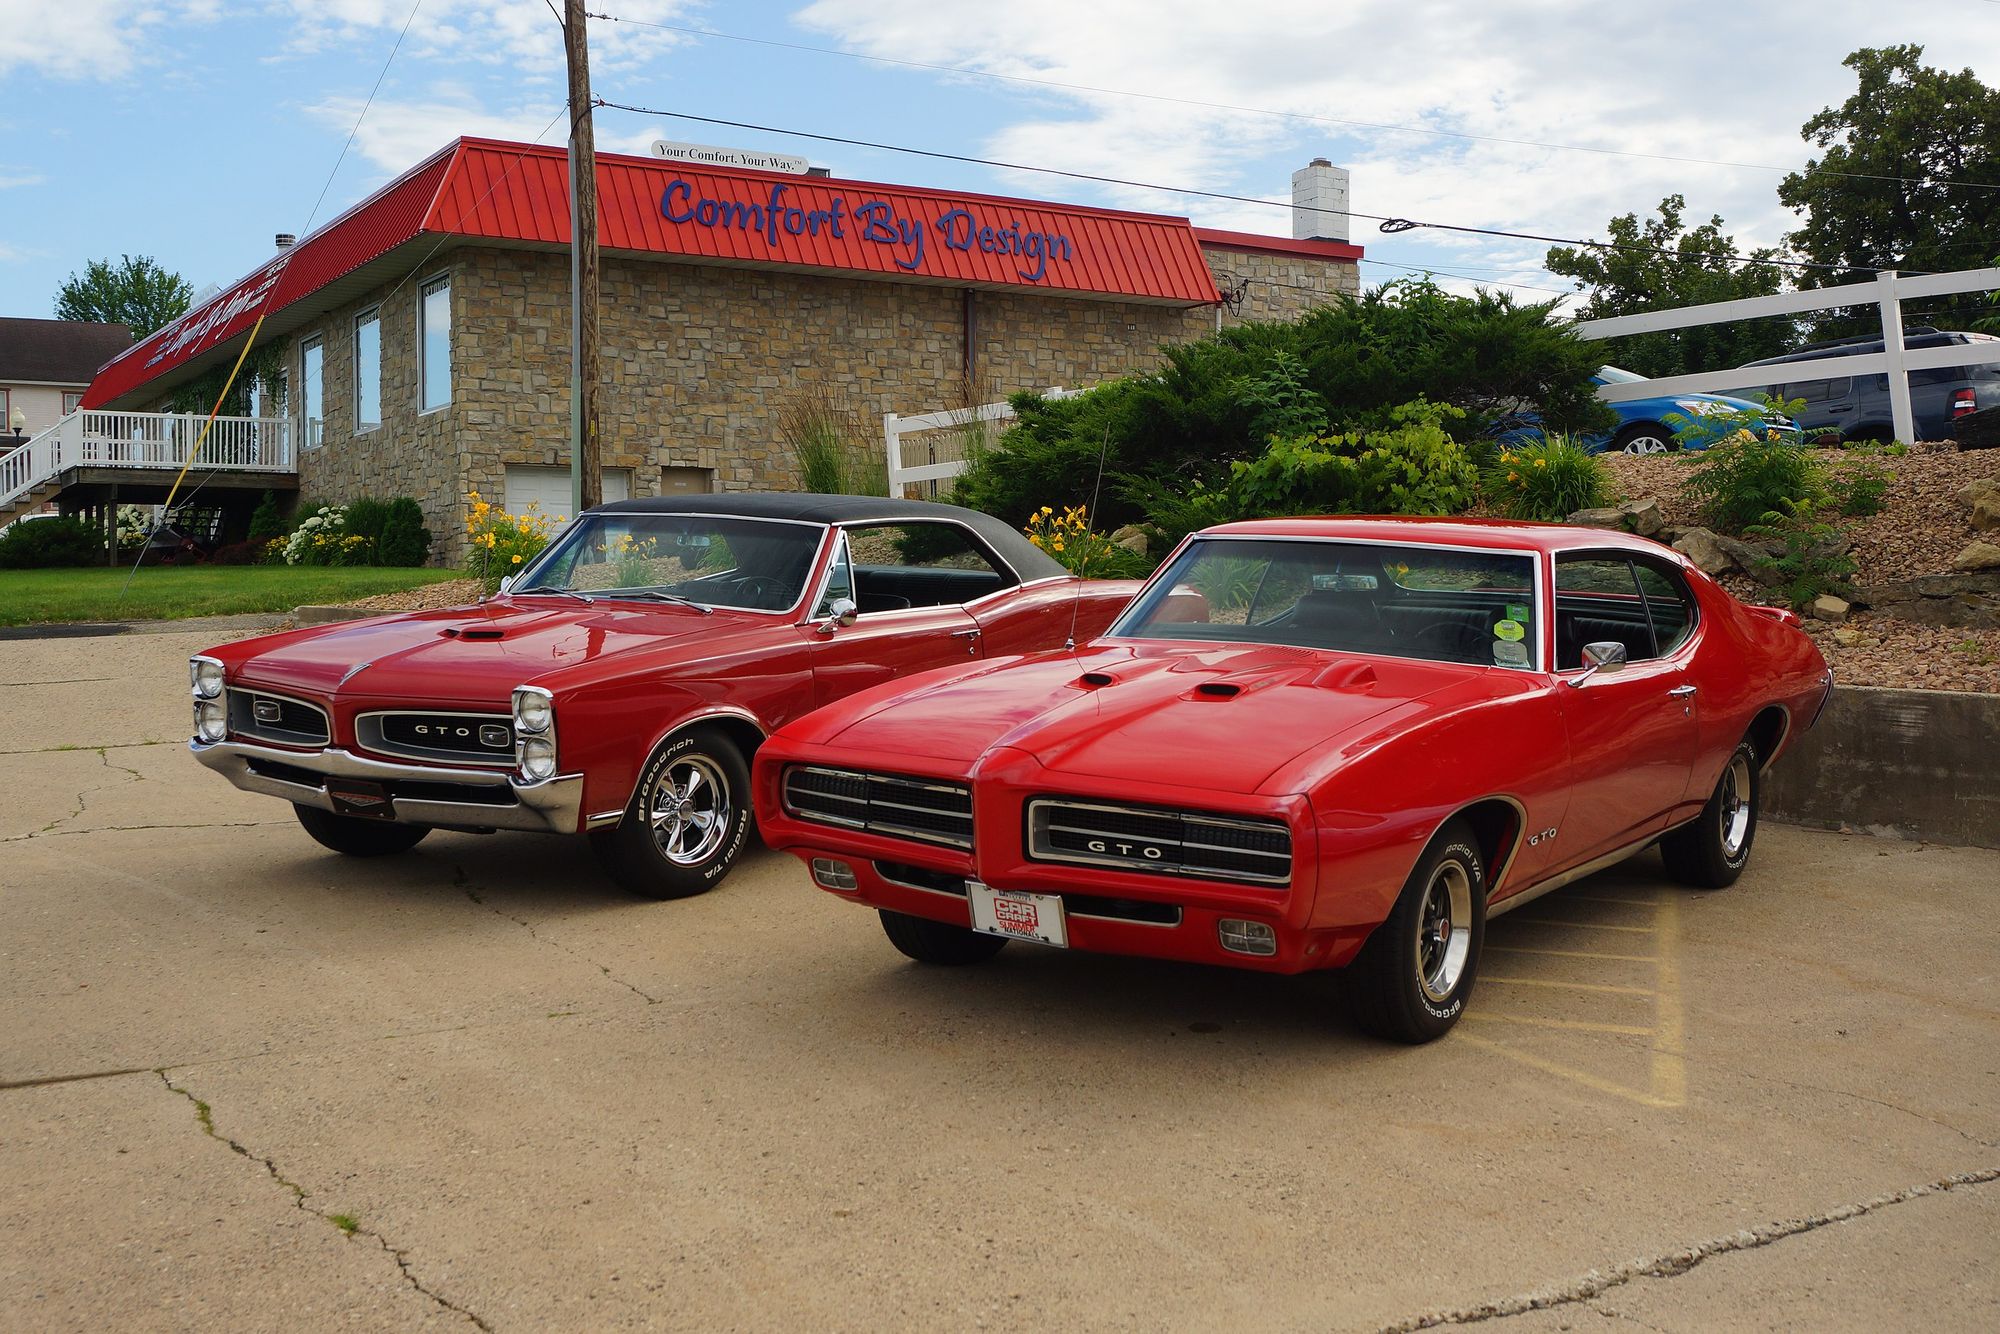 The History Of America’s Most Rebellious Muscle Car: The GTO